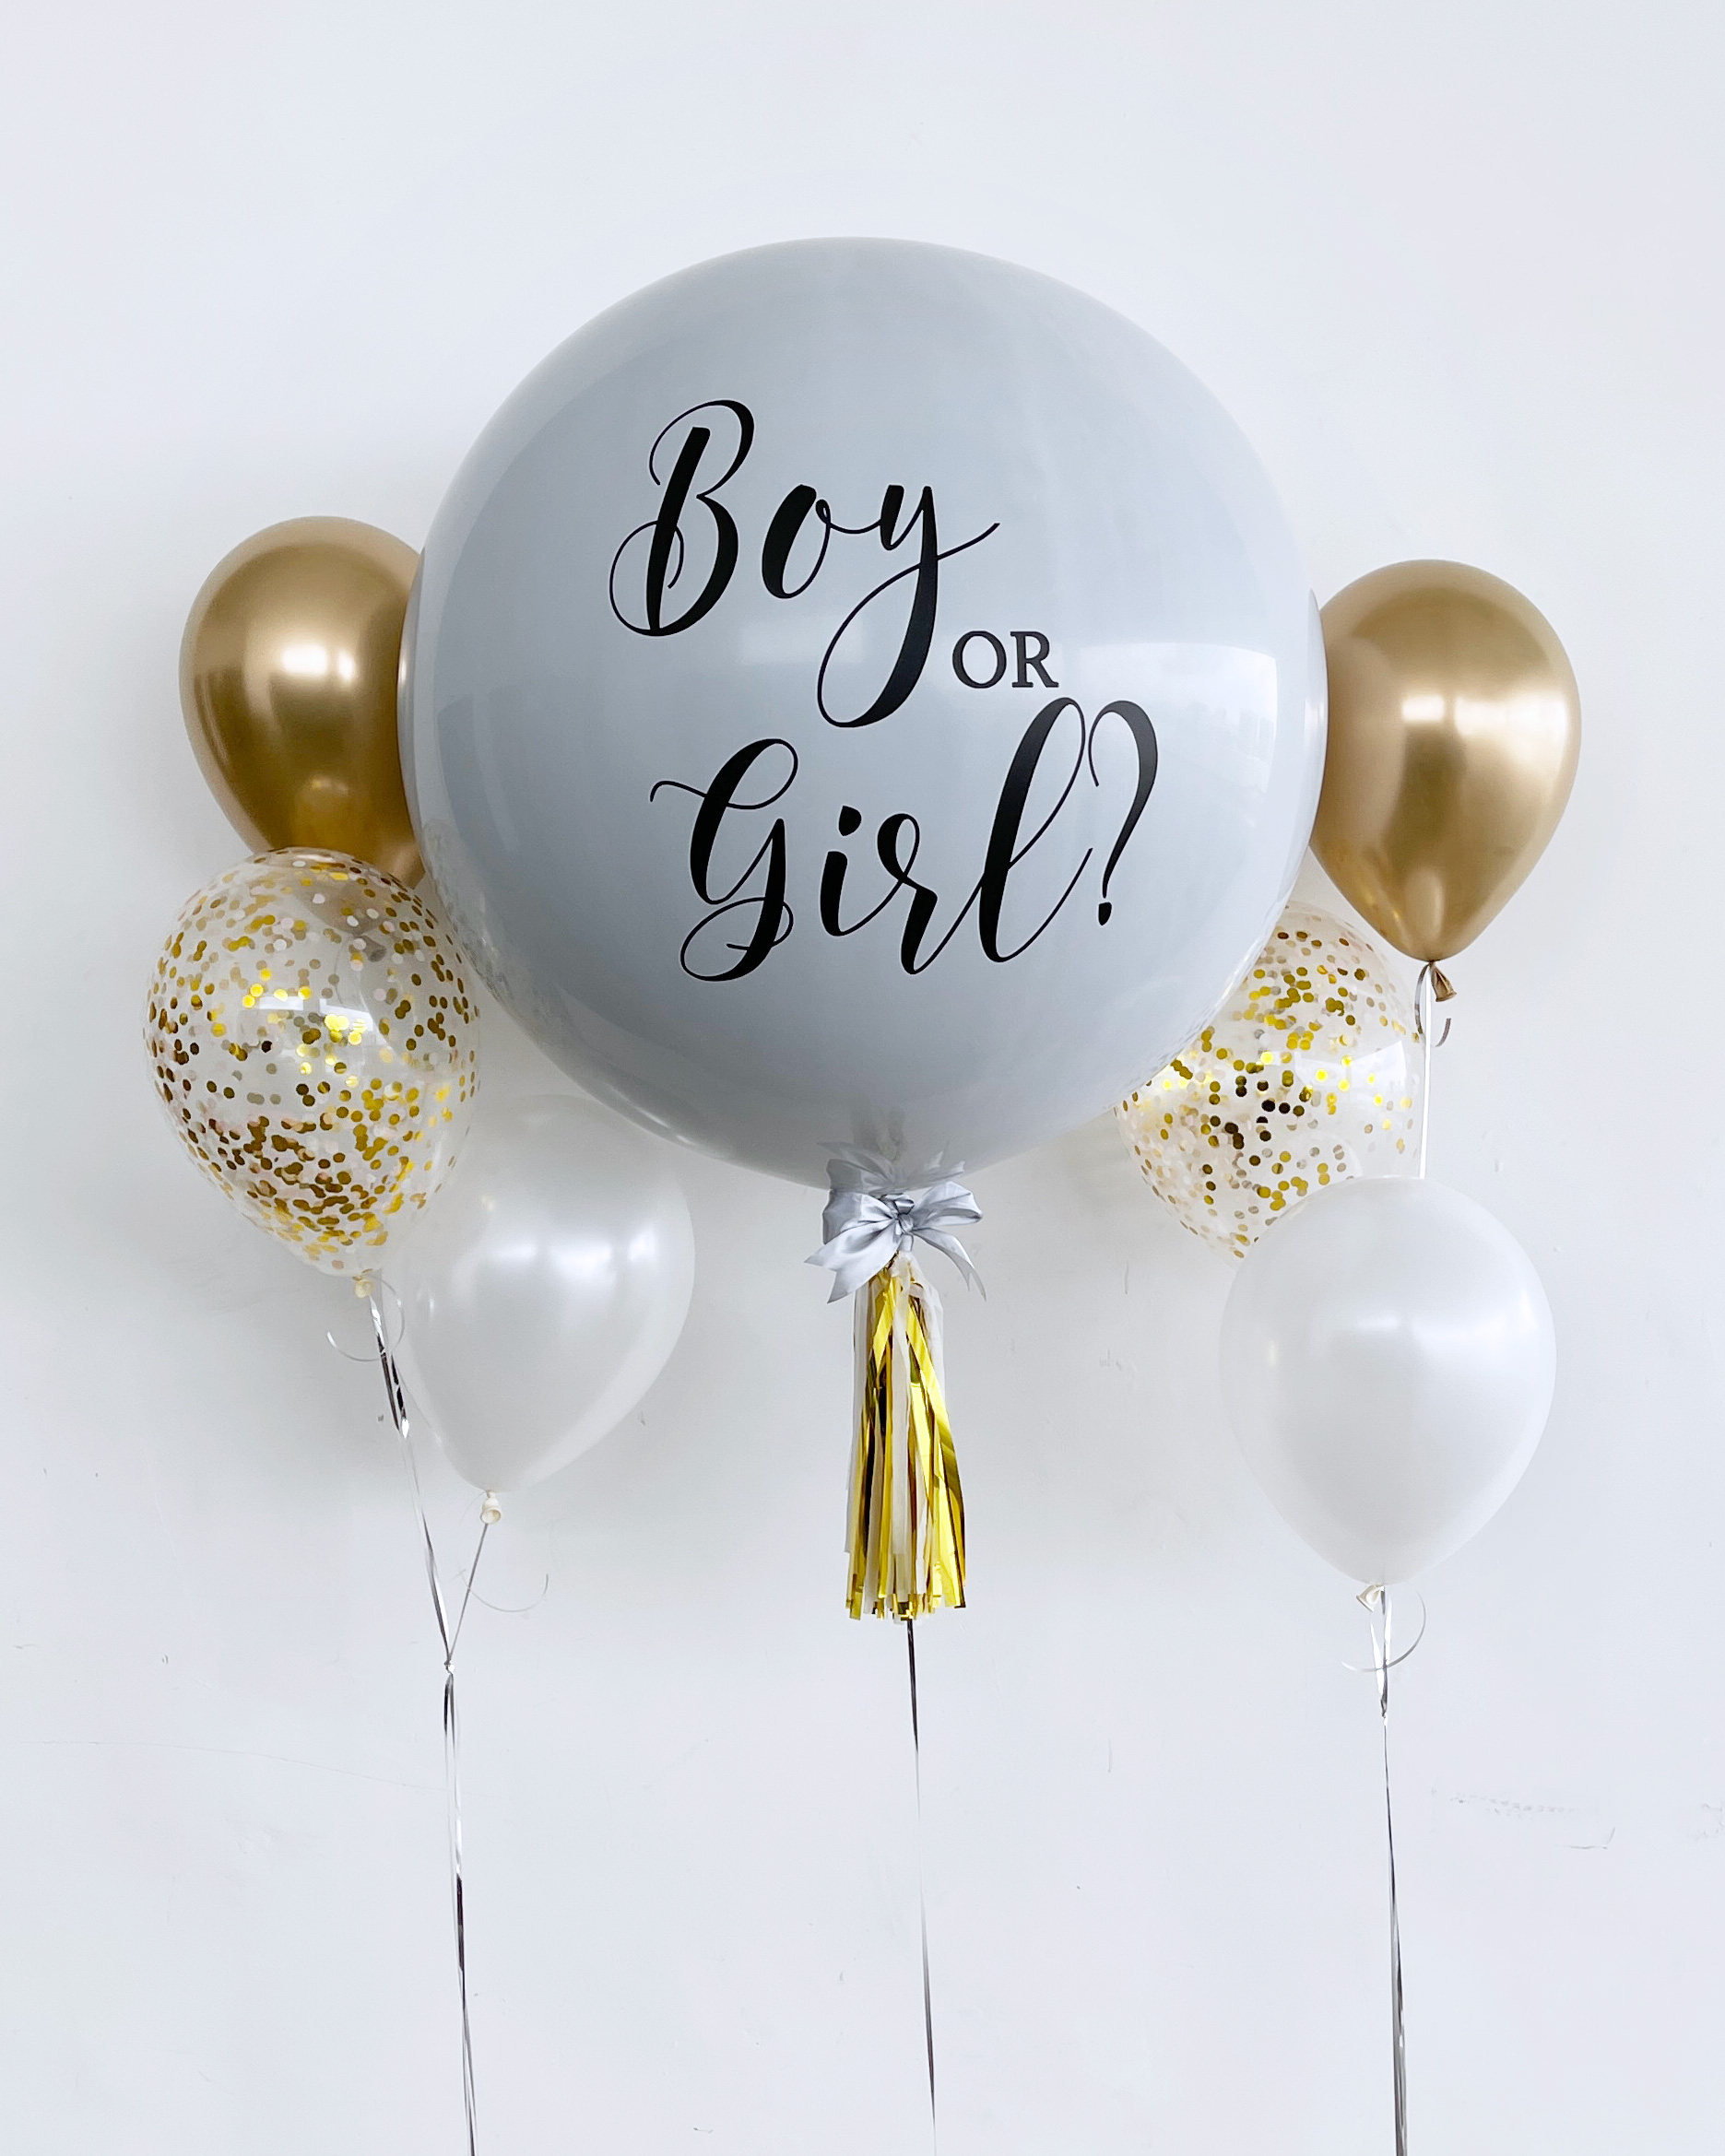 Boy or Girl Gender Reveal Balloon 36 inch confetti and mini balloons stuffed